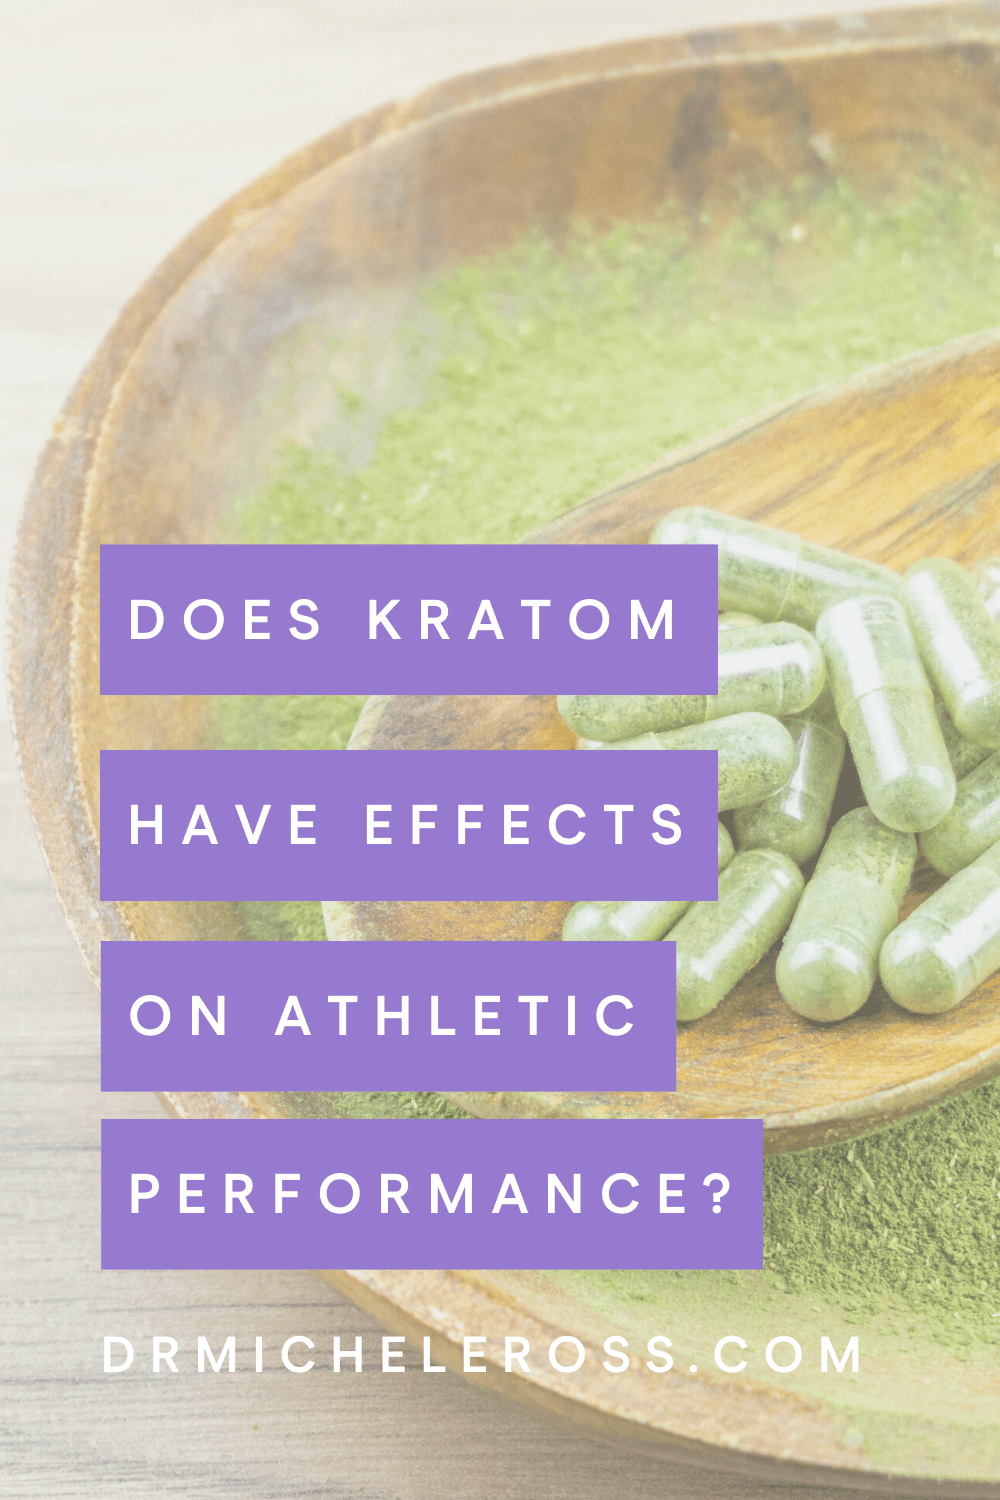 kratom capsules athletes take to perform better at sports